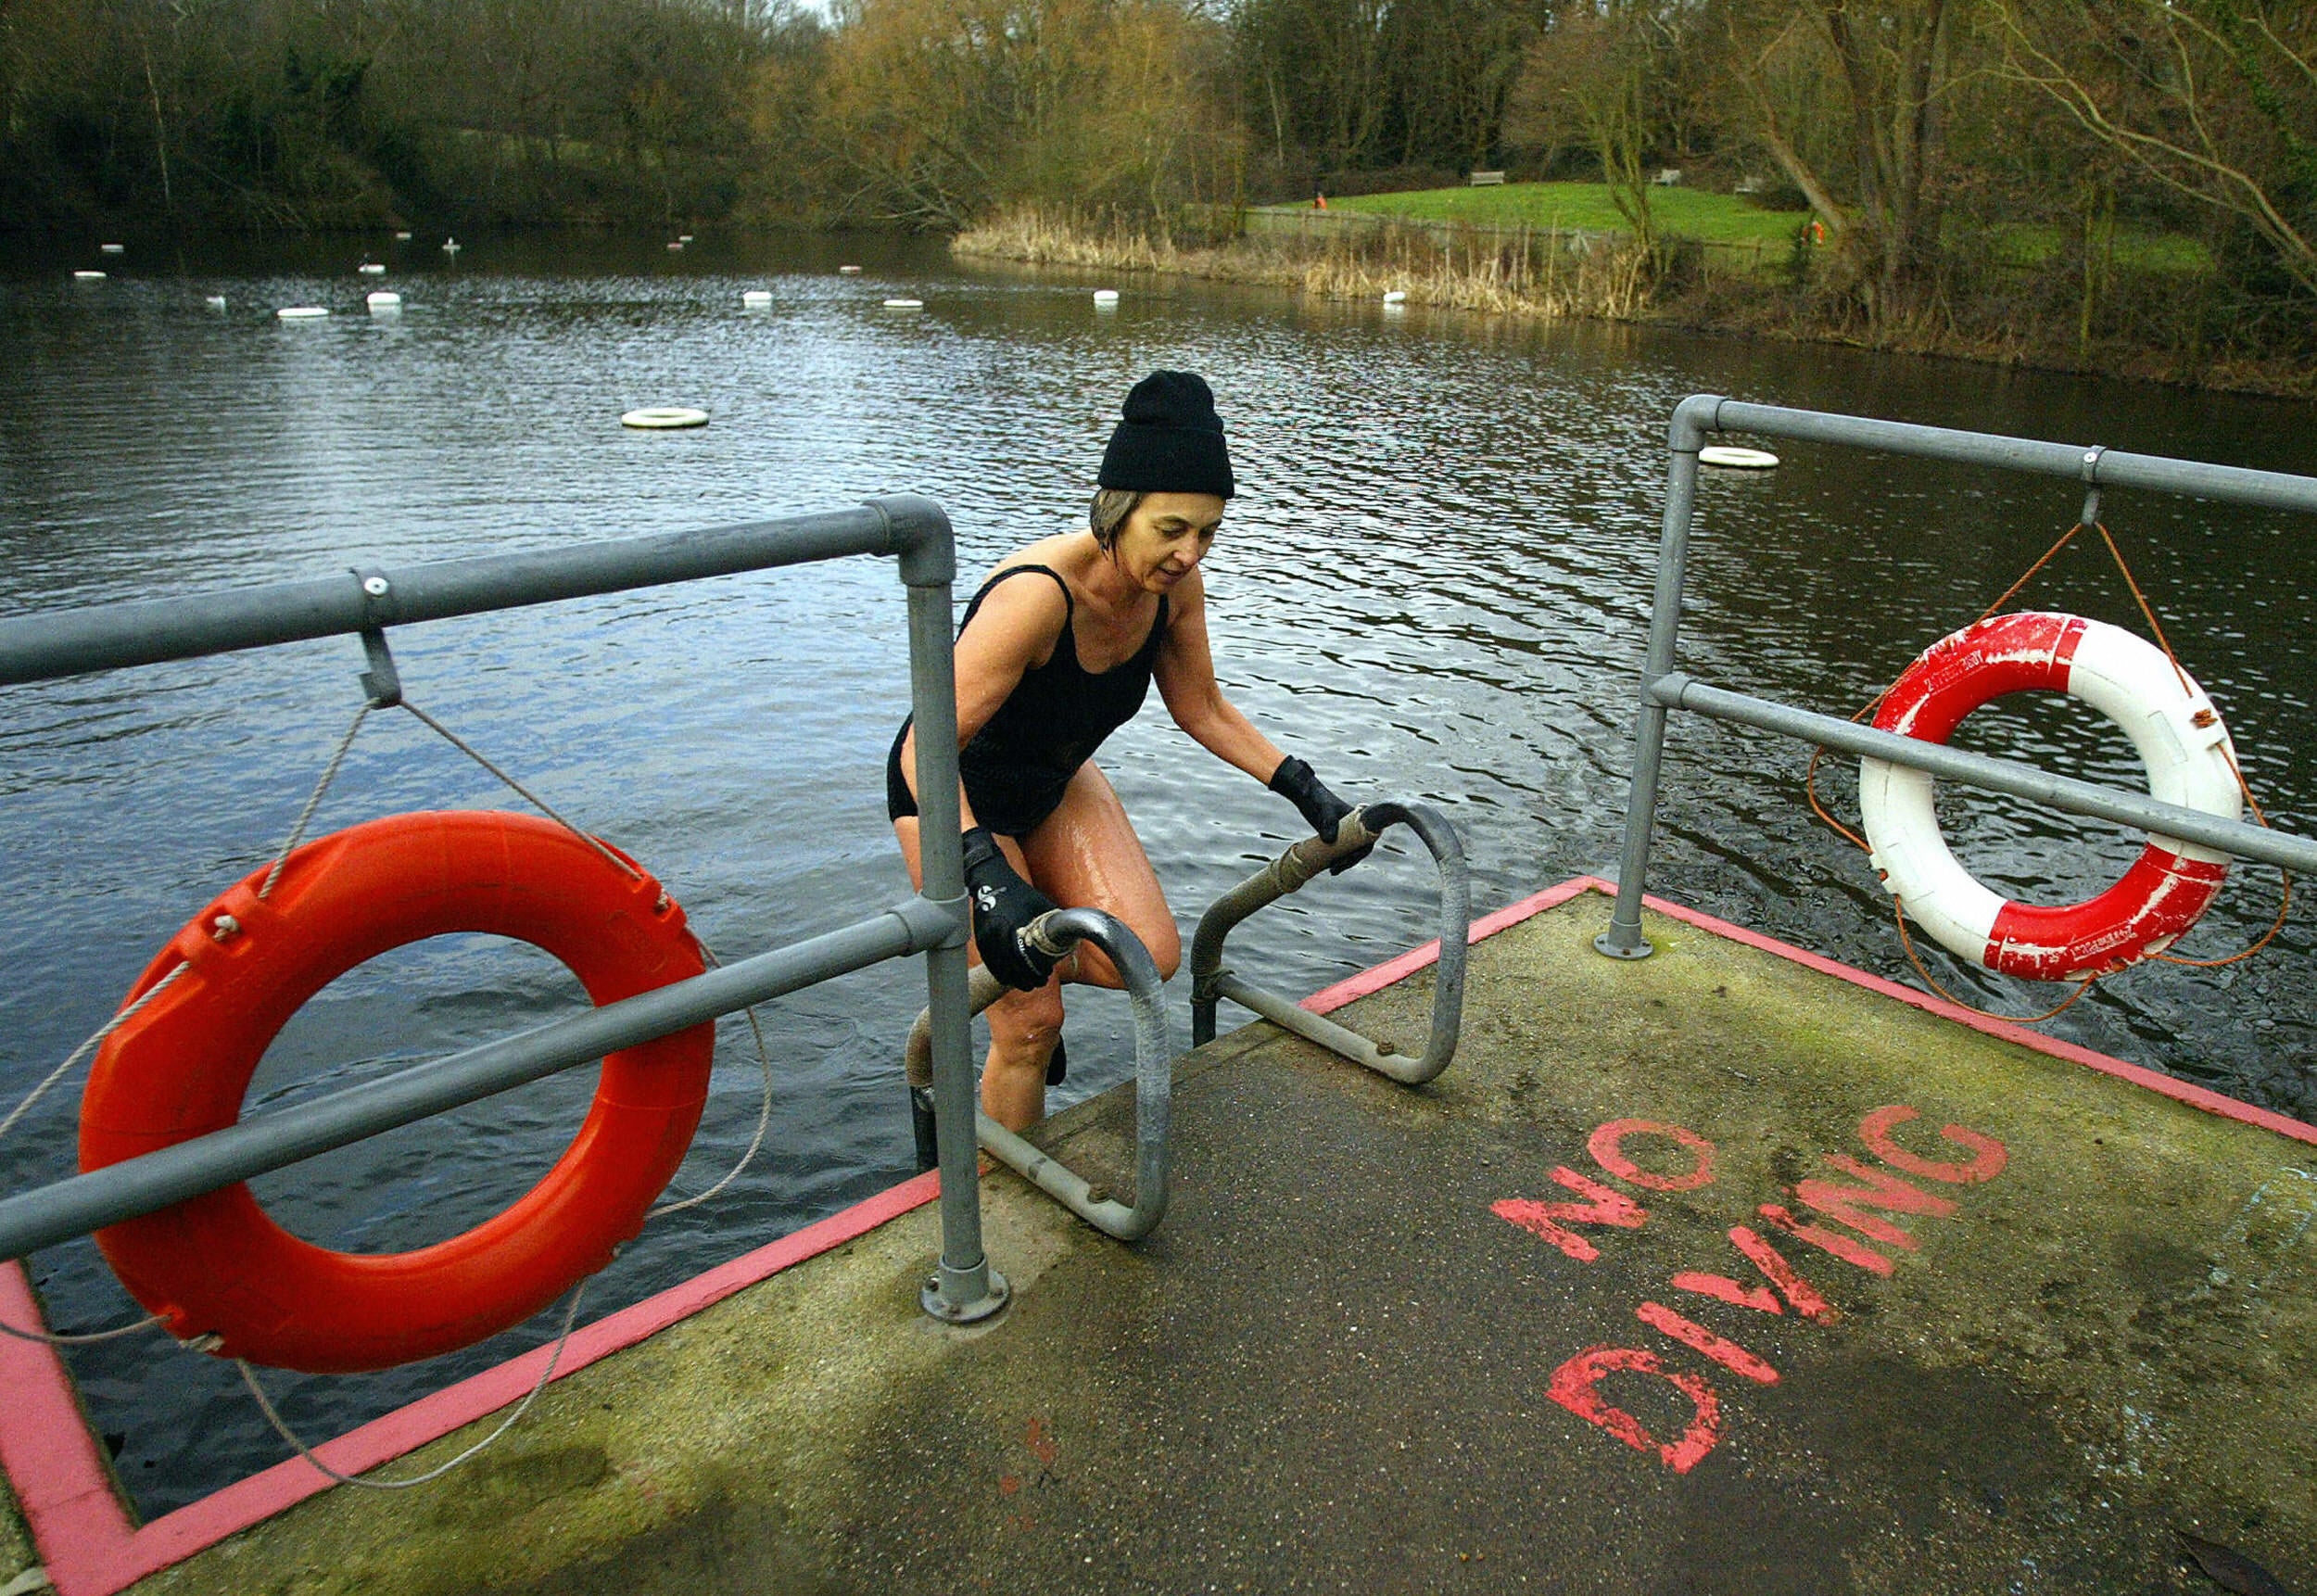 A woman takes a dip in the Hampstead Heath women's ponds in January 2005